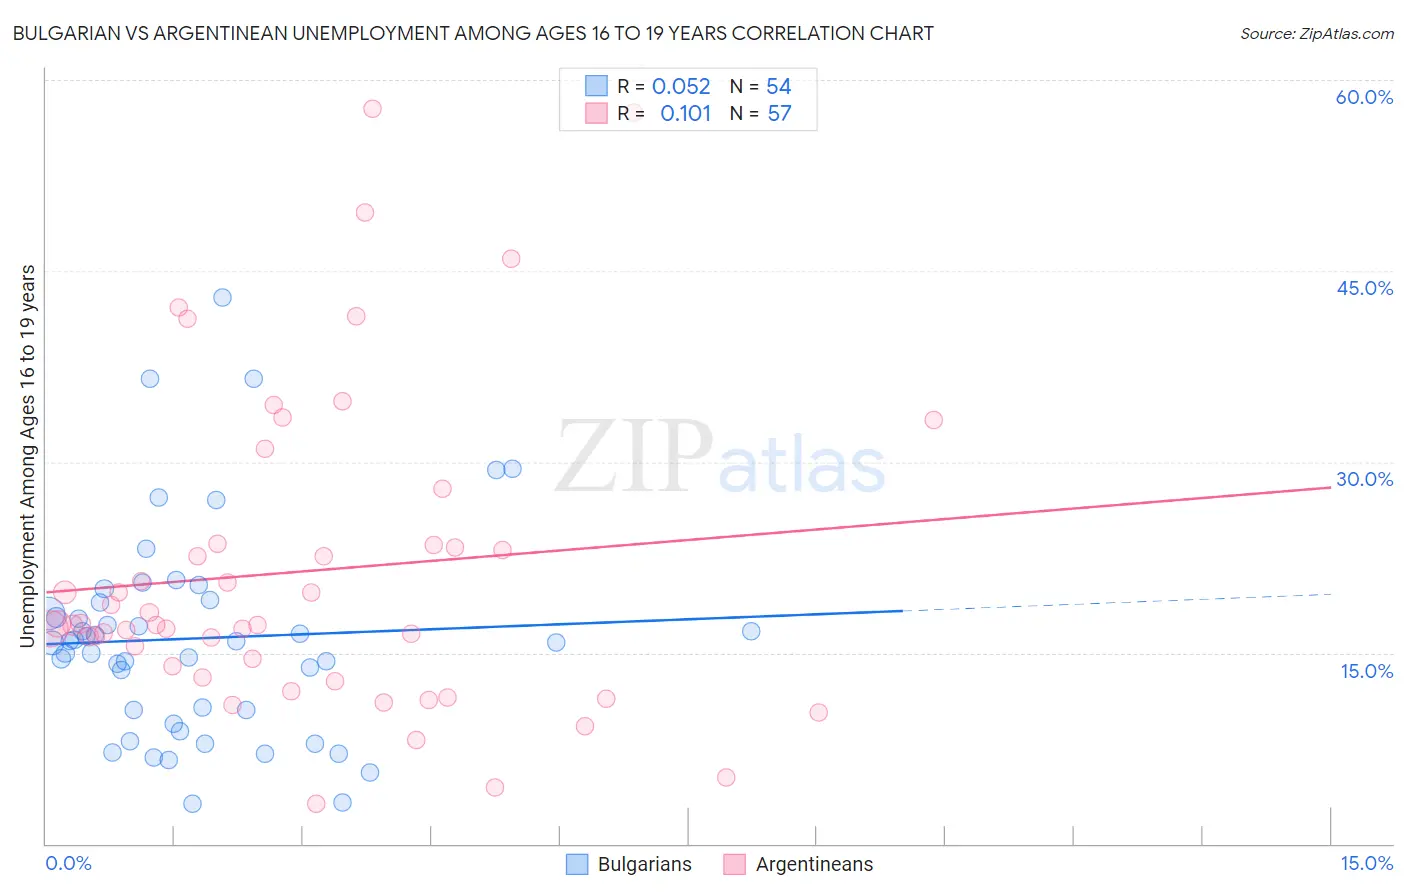 Bulgarian vs Argentinean Unemployment Among Ages 16 to 19 years